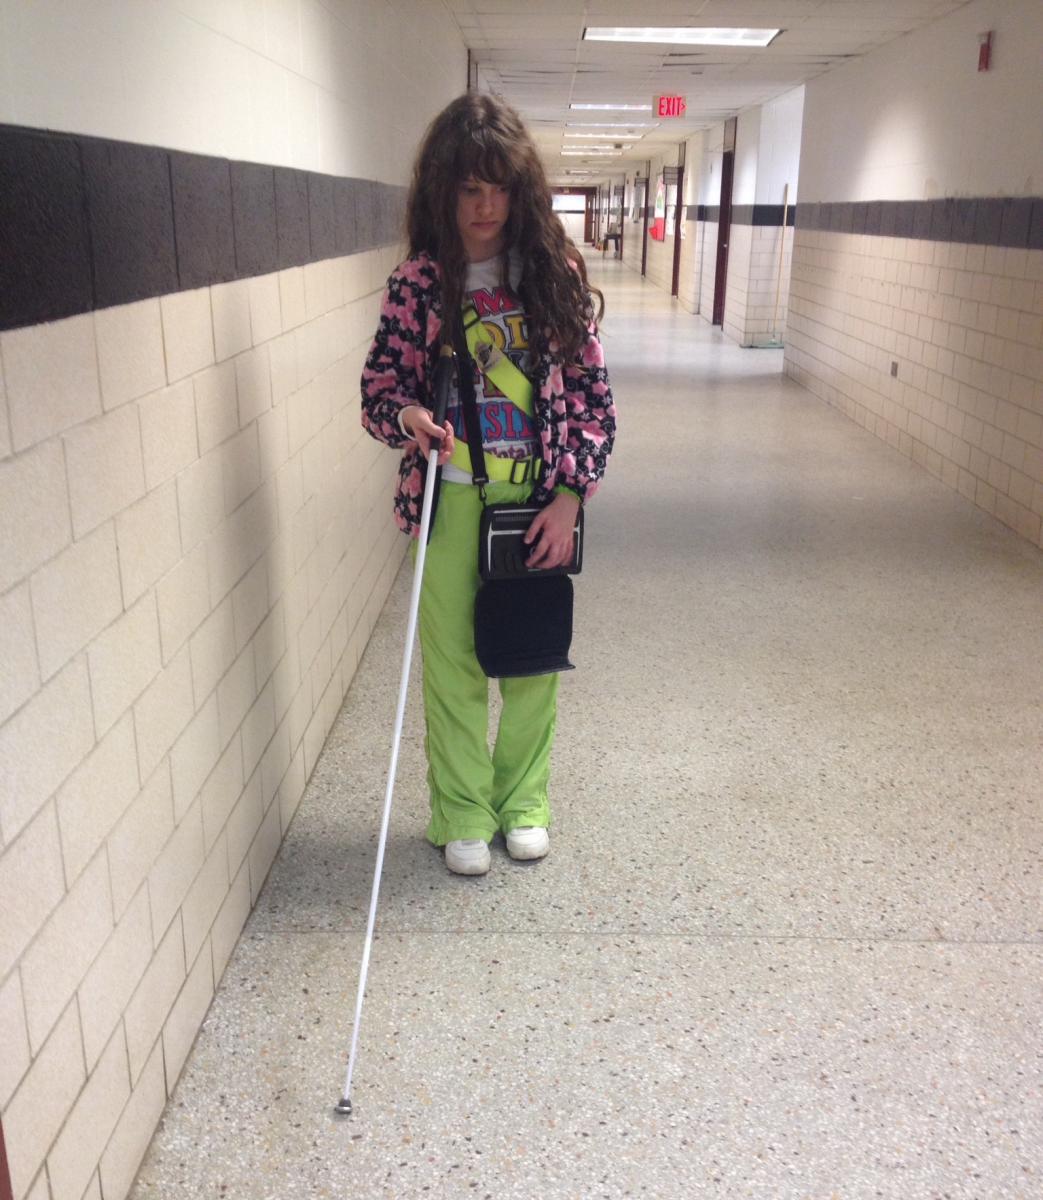 Girl using cane while traveling in hallway